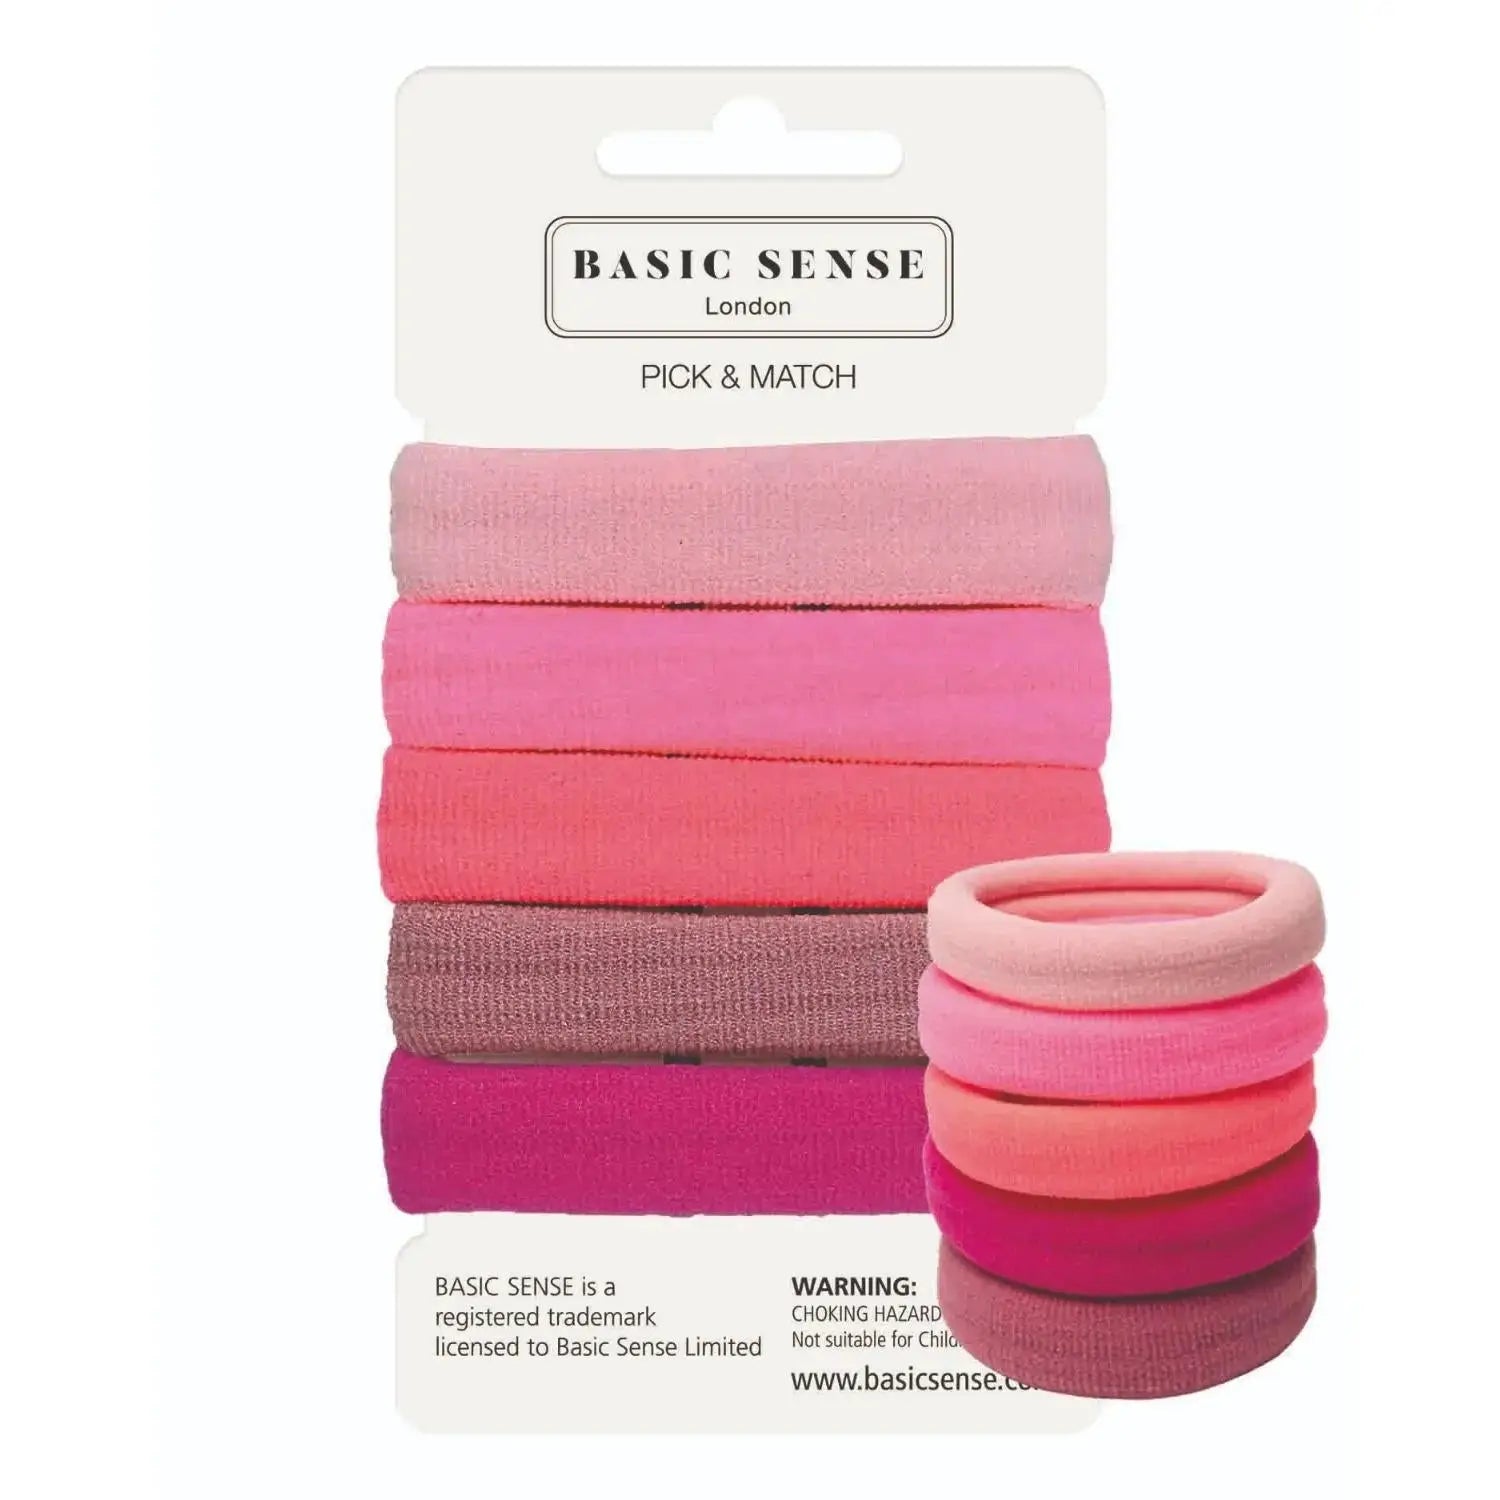 Cotton blend, strong hair elastics for women and girls, a set in shades of pink, ideal for a young girl's birthday gift or daily use.